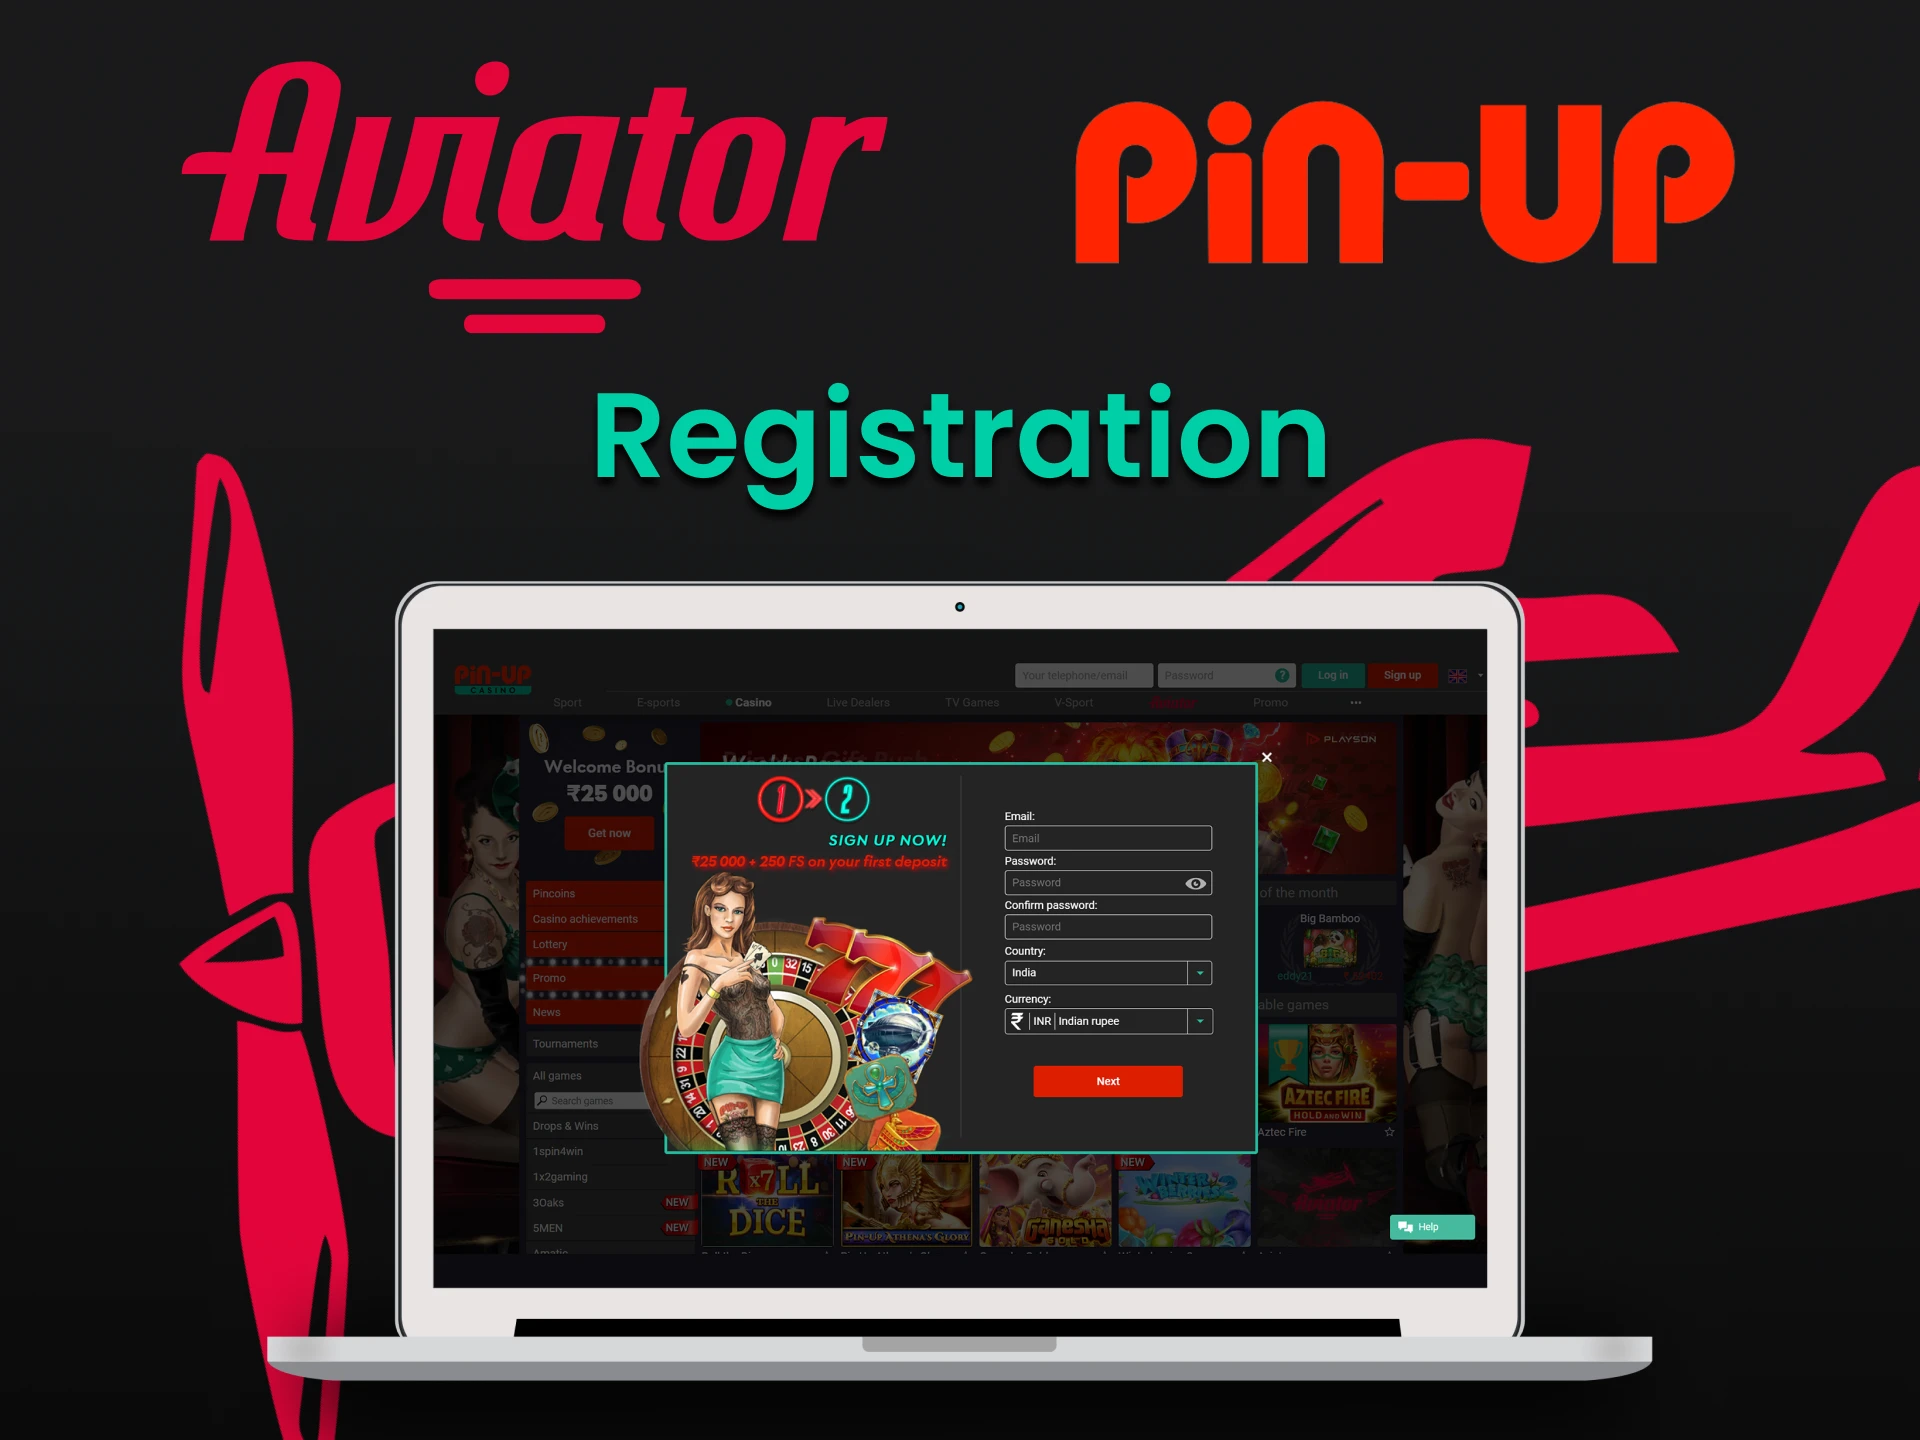 To start winning at Aviator, you need to create an account on Pin Up.